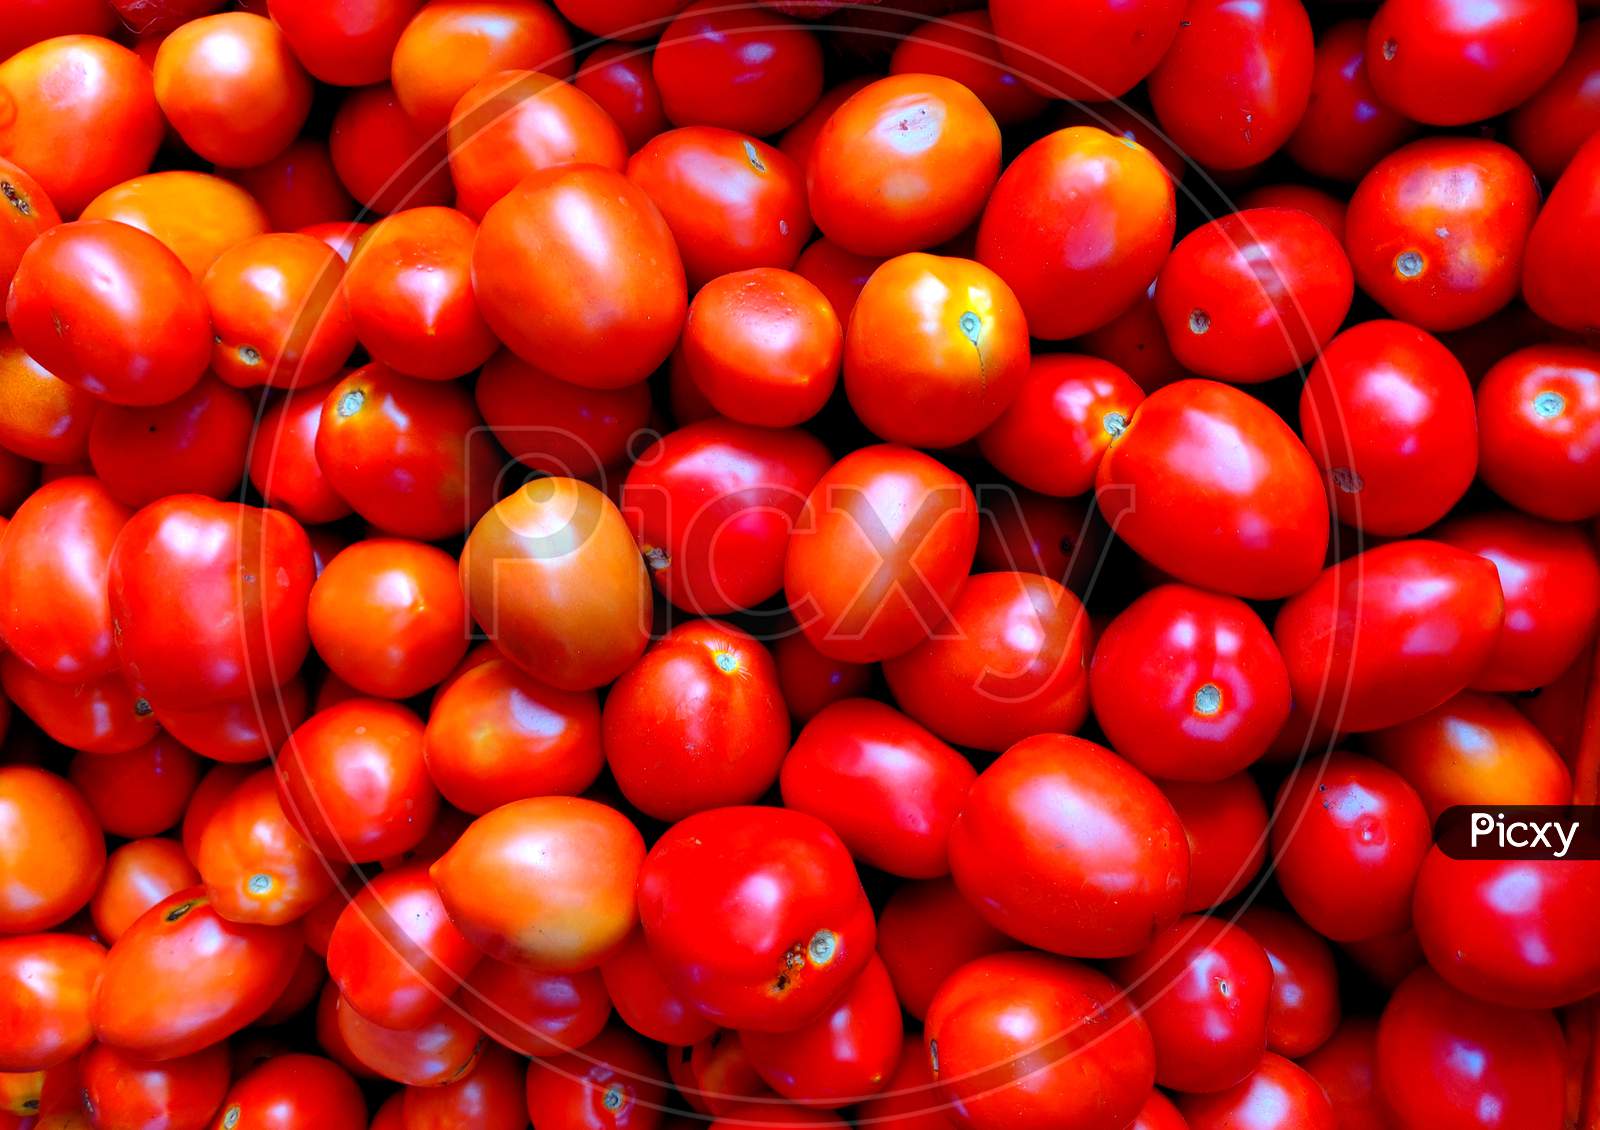 A Basket Full Of The Red Tomatoes, It Is The Edible Berry Of The Plant Solanum Lycopersicum, Commonly Known As A Tomato Plant.